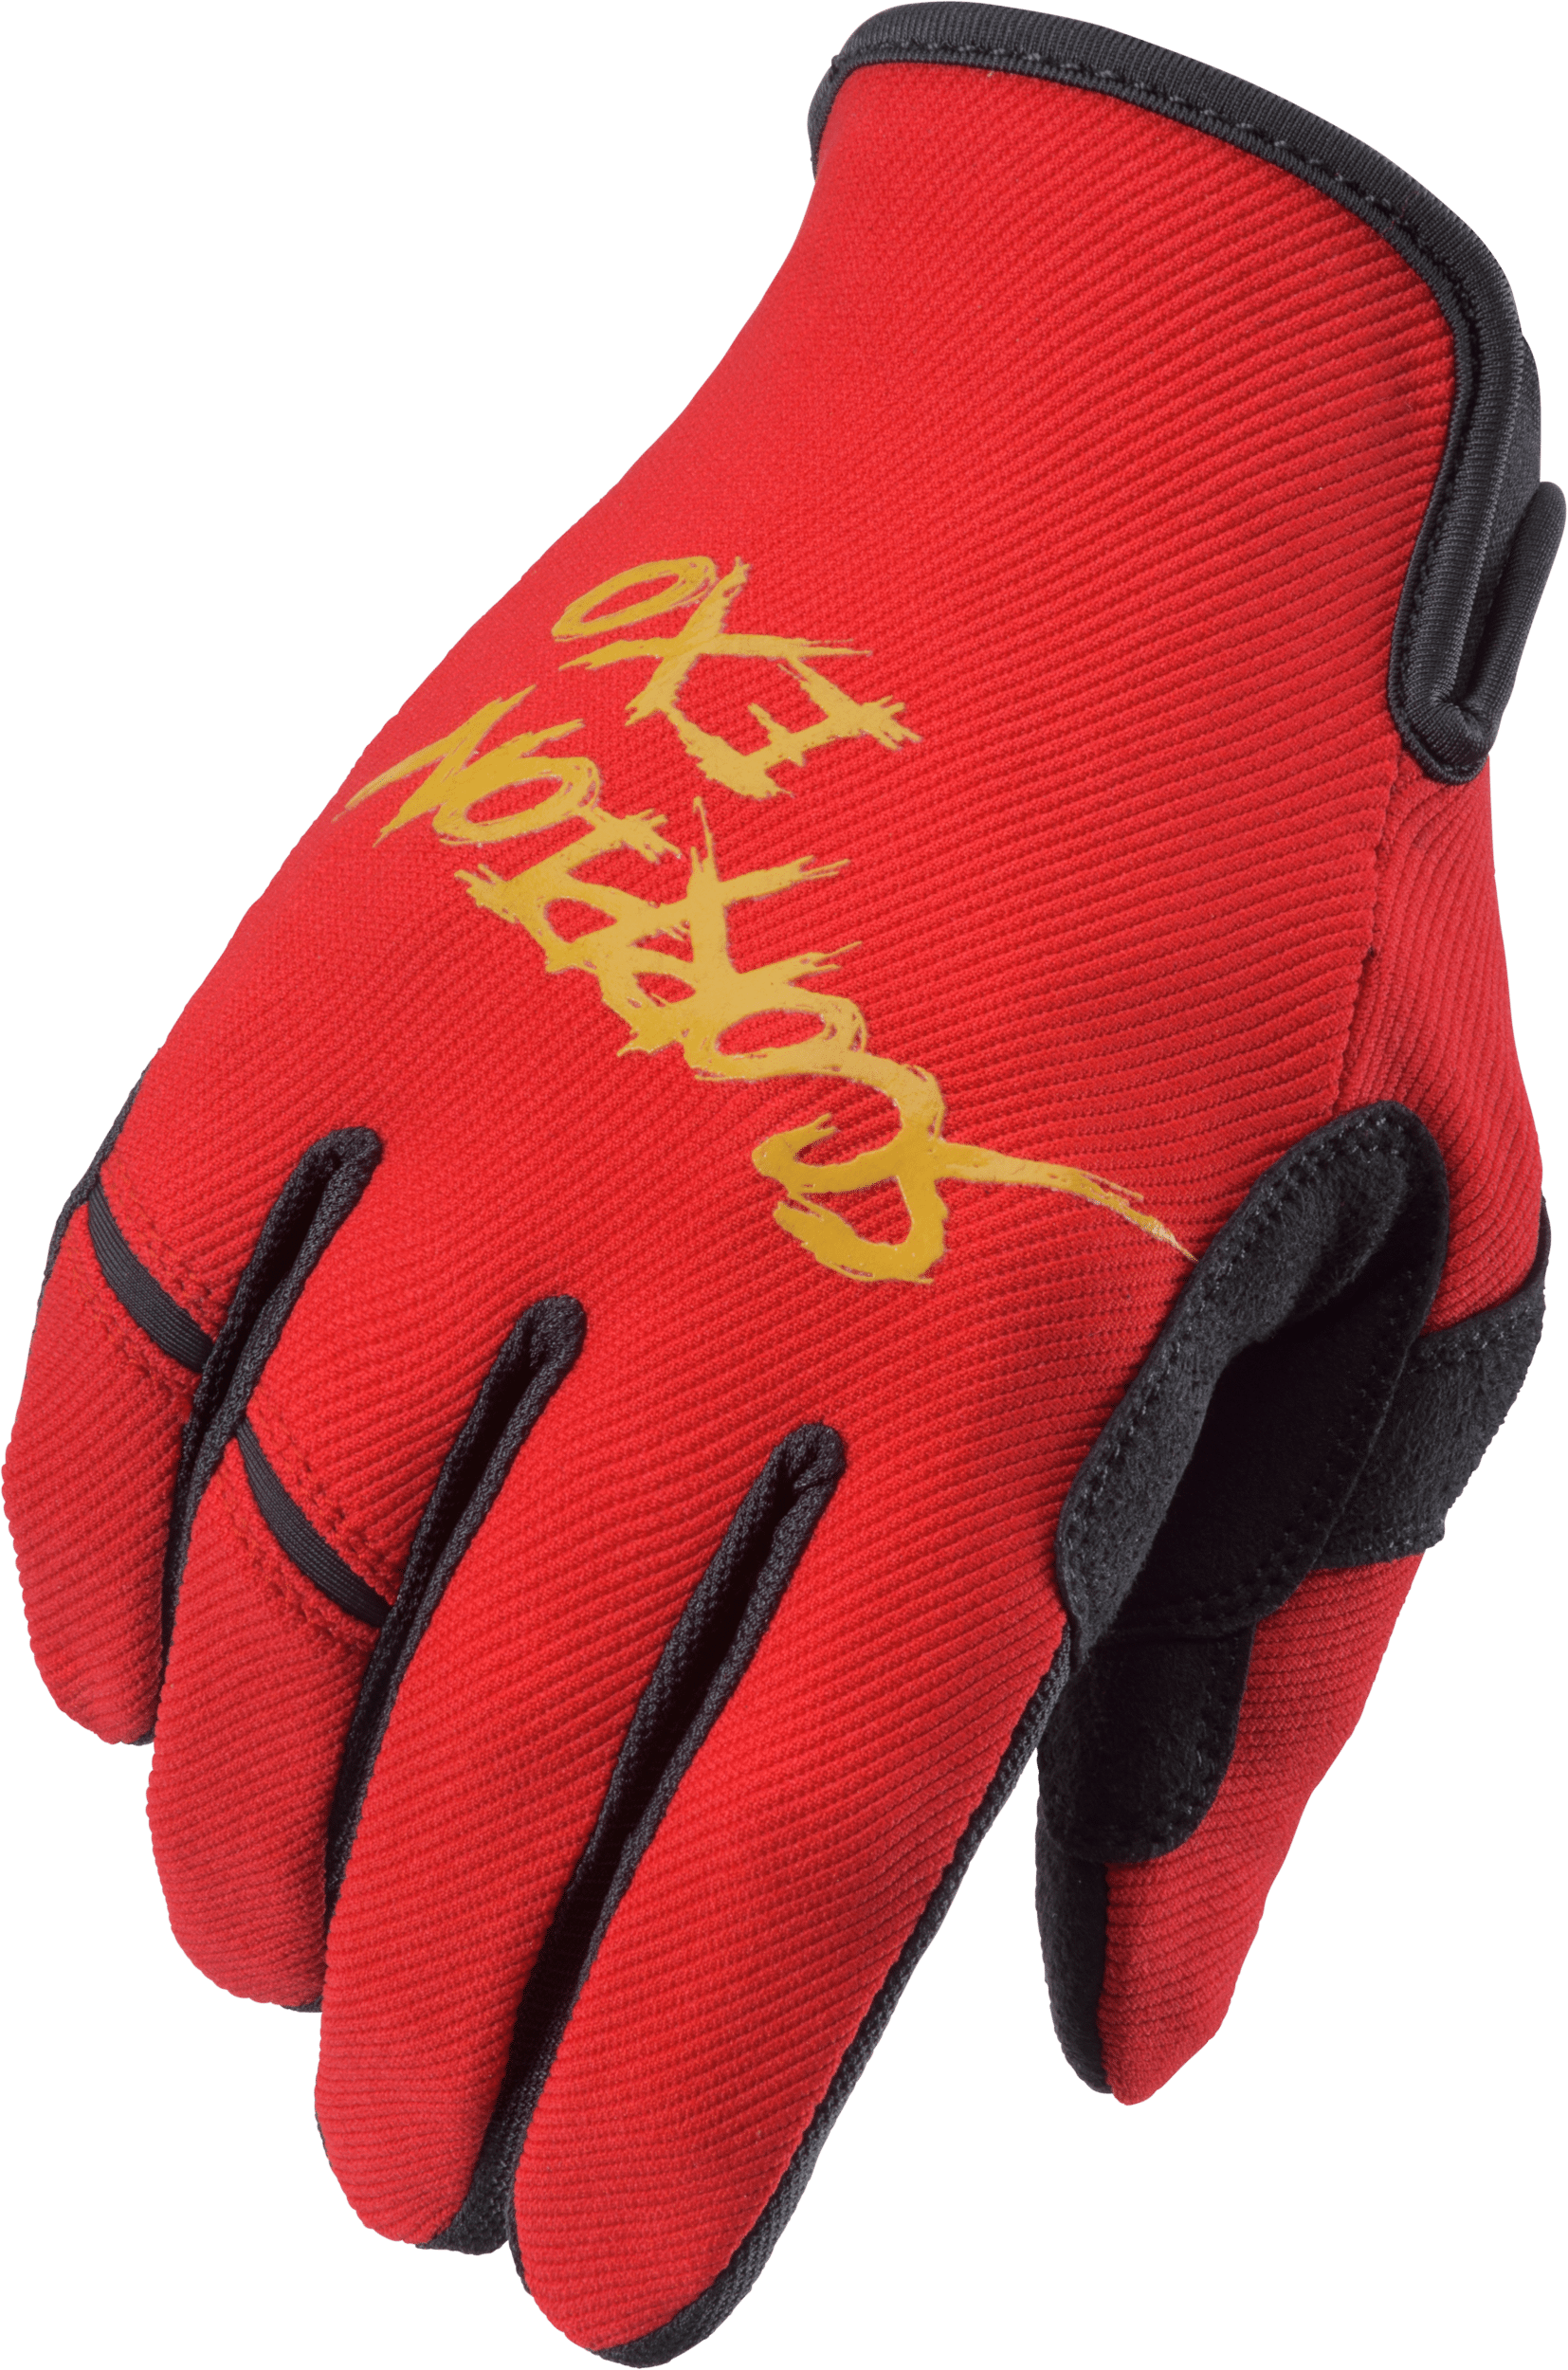 Western Powersports Gloves Red/Gold / 2X-Large Air-Stretch Grind Gloves by Scorpion Exo G46-017